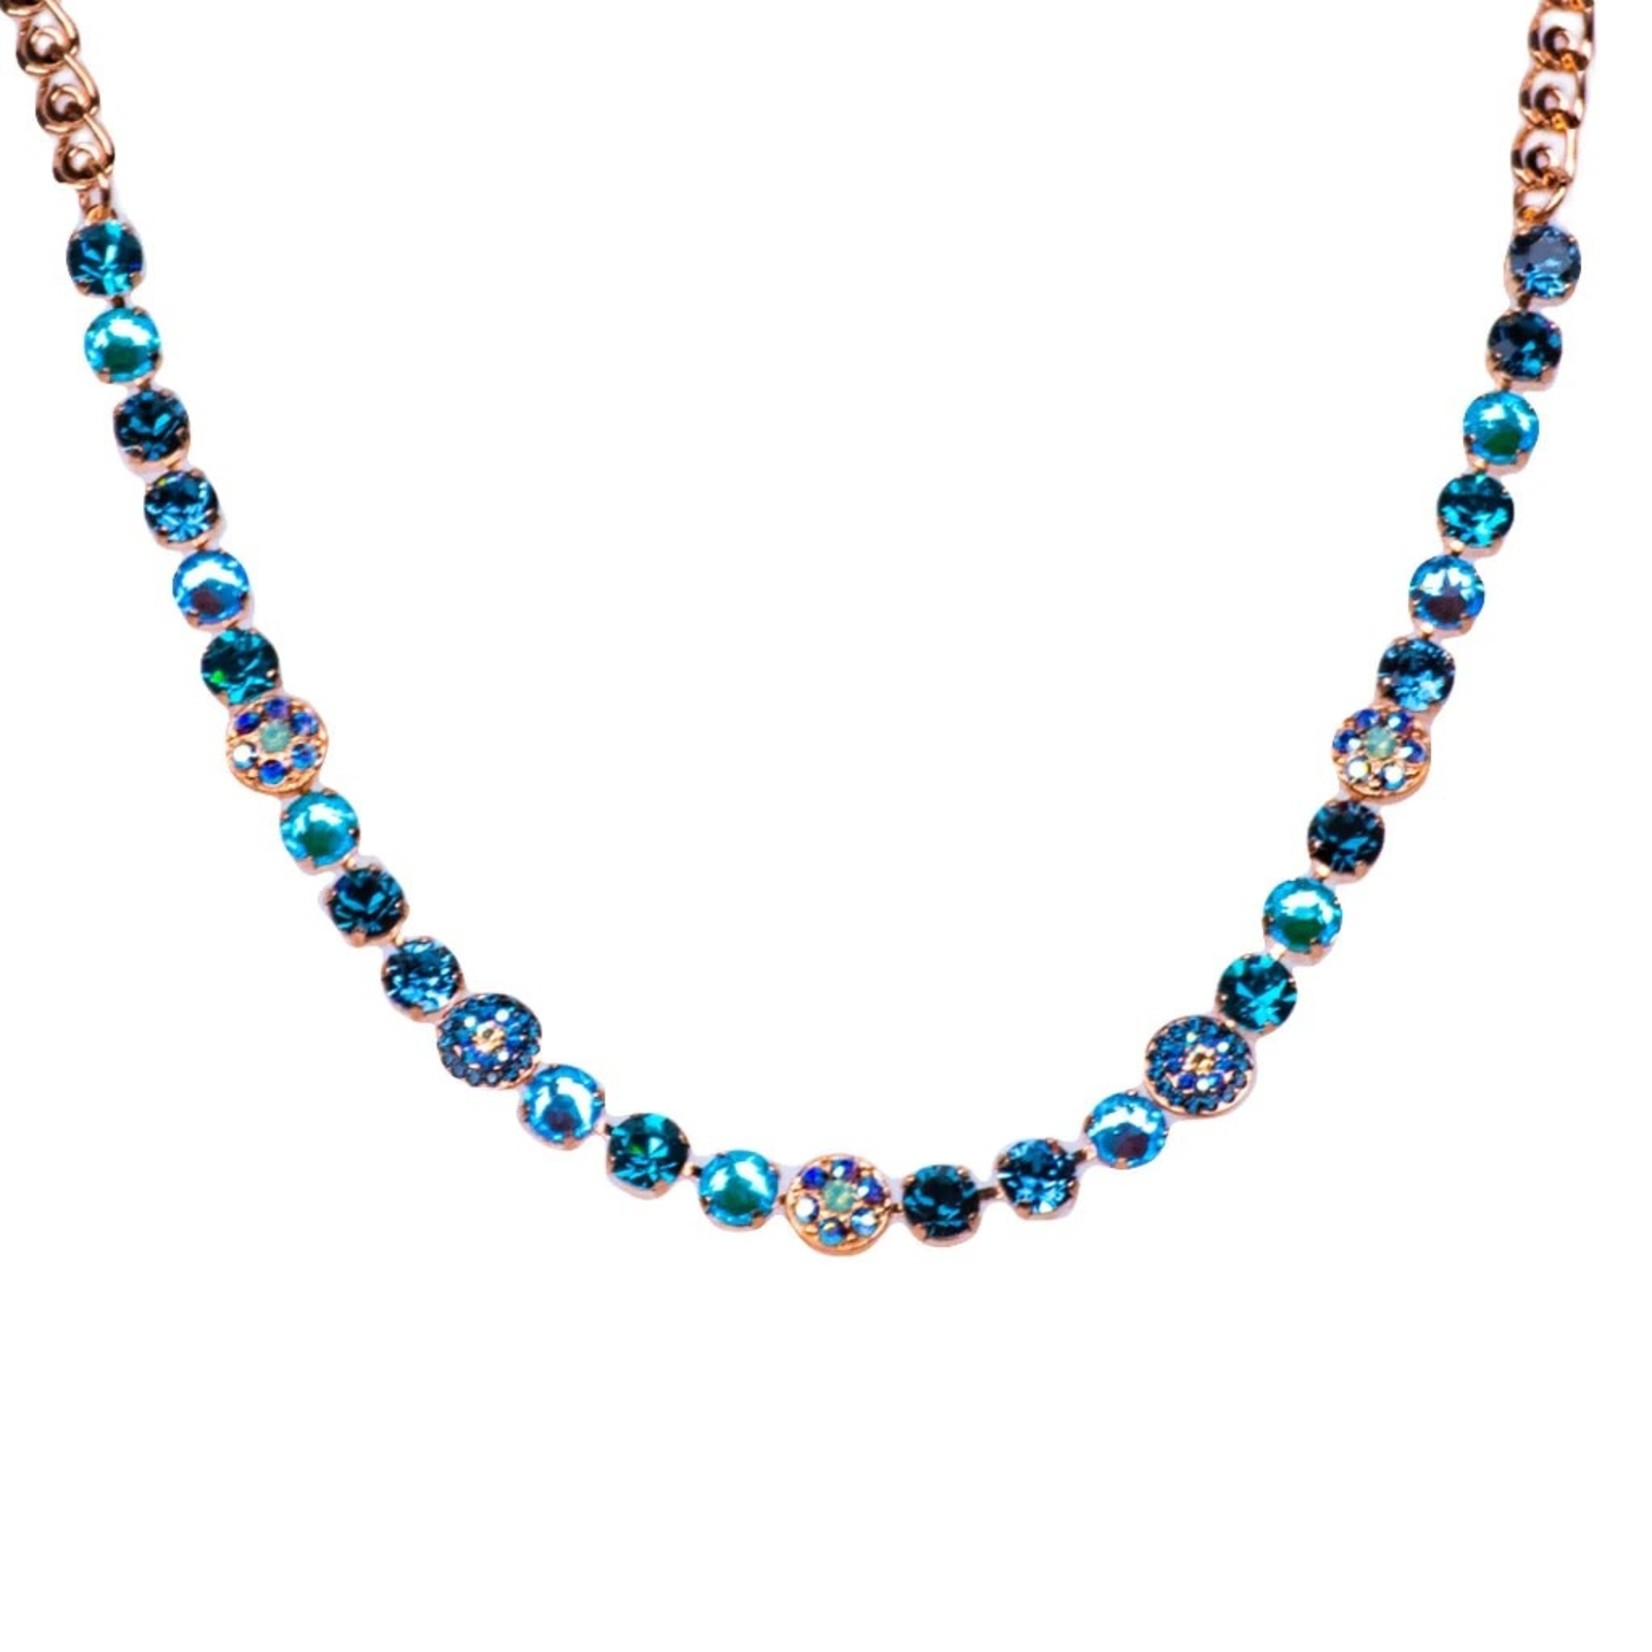 MARIANA MUST HAVE PAVE' NECKLACE